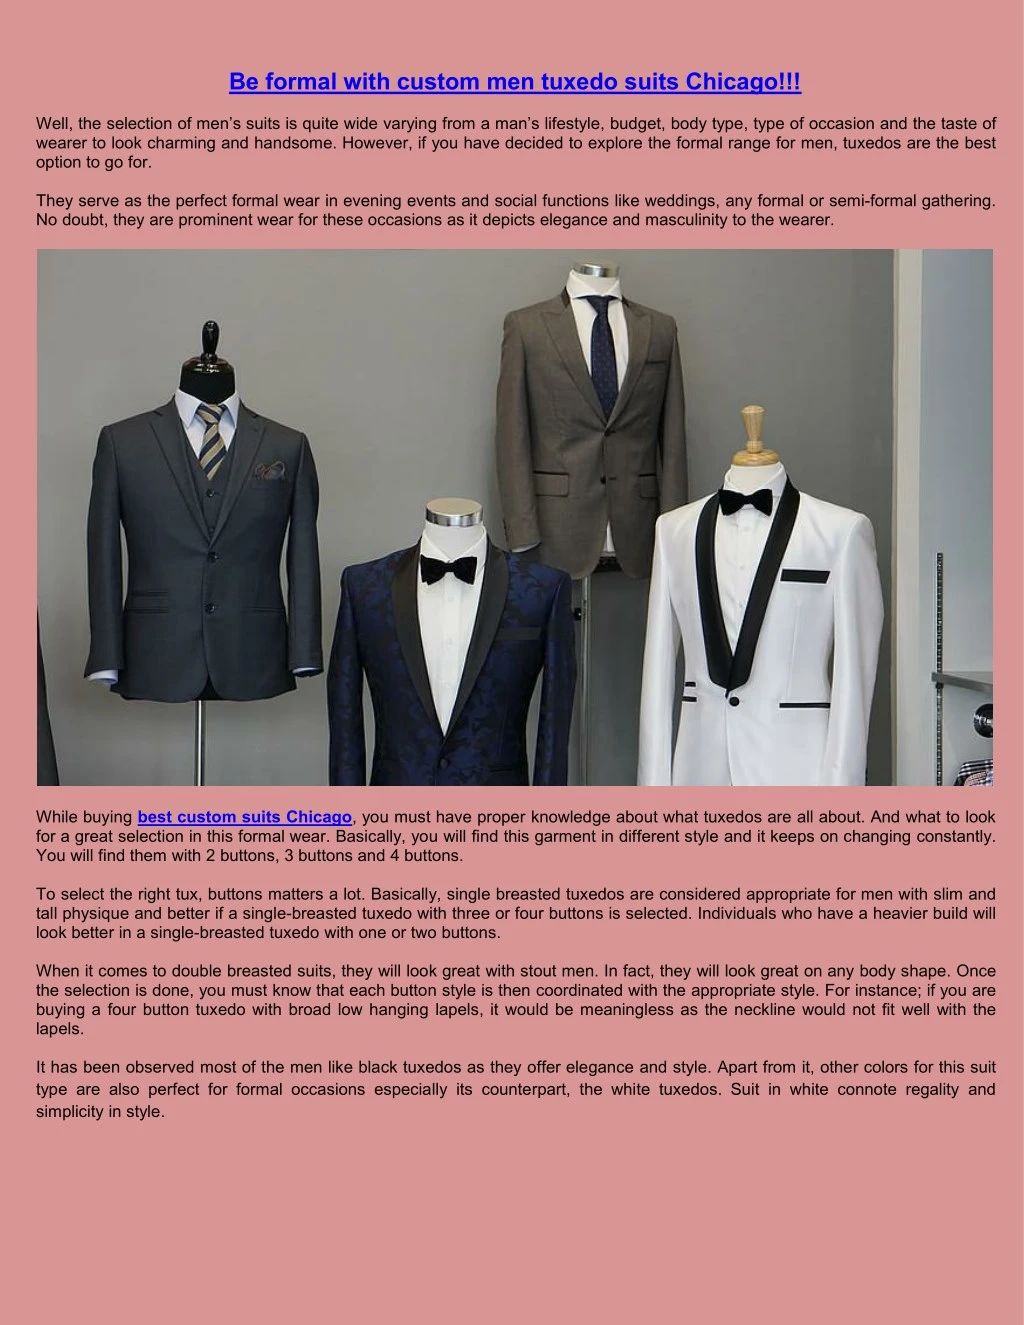 be formal with custom men tuxedo suits chicago